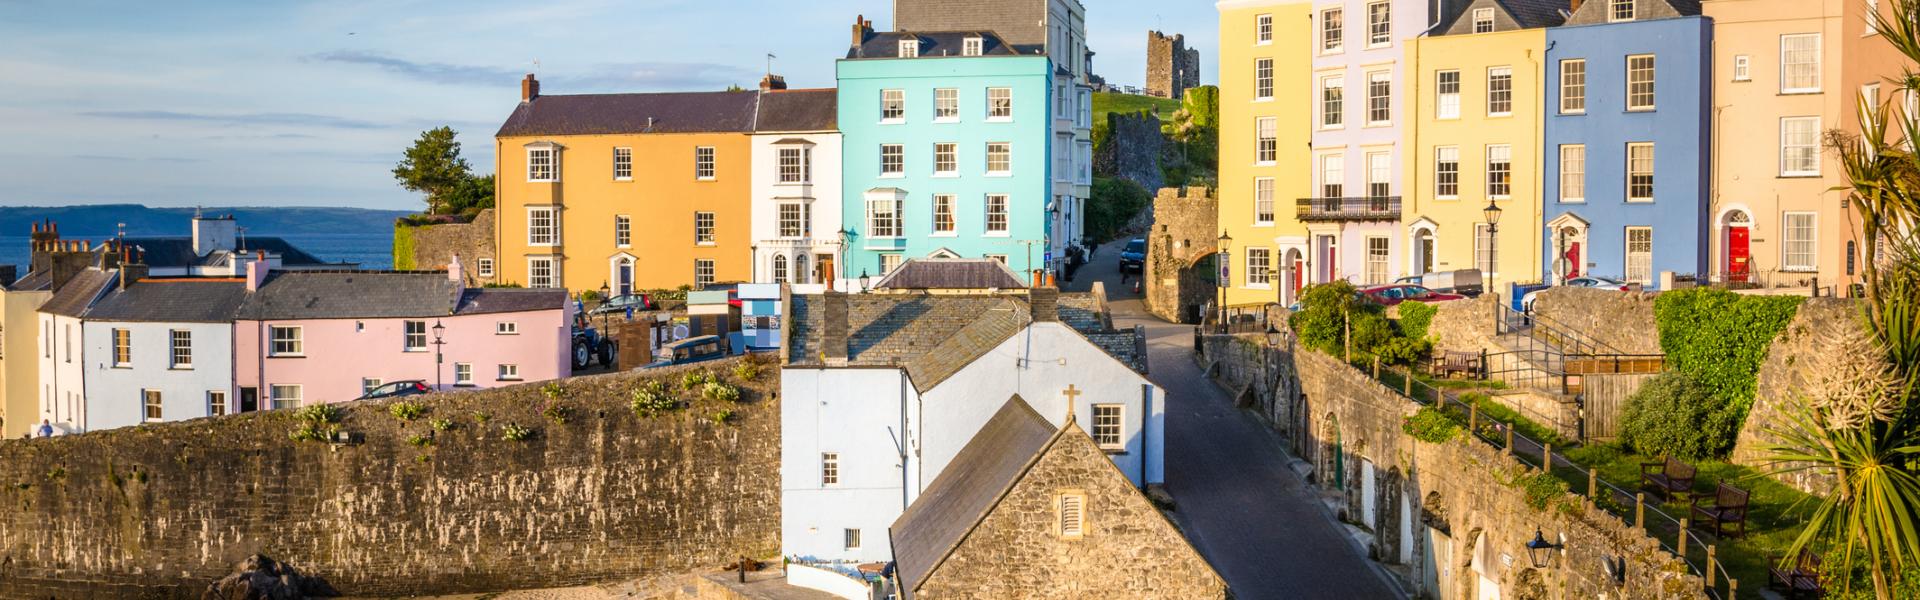 Holiday Cottages & Accommodation in Tenby - HomeToGo